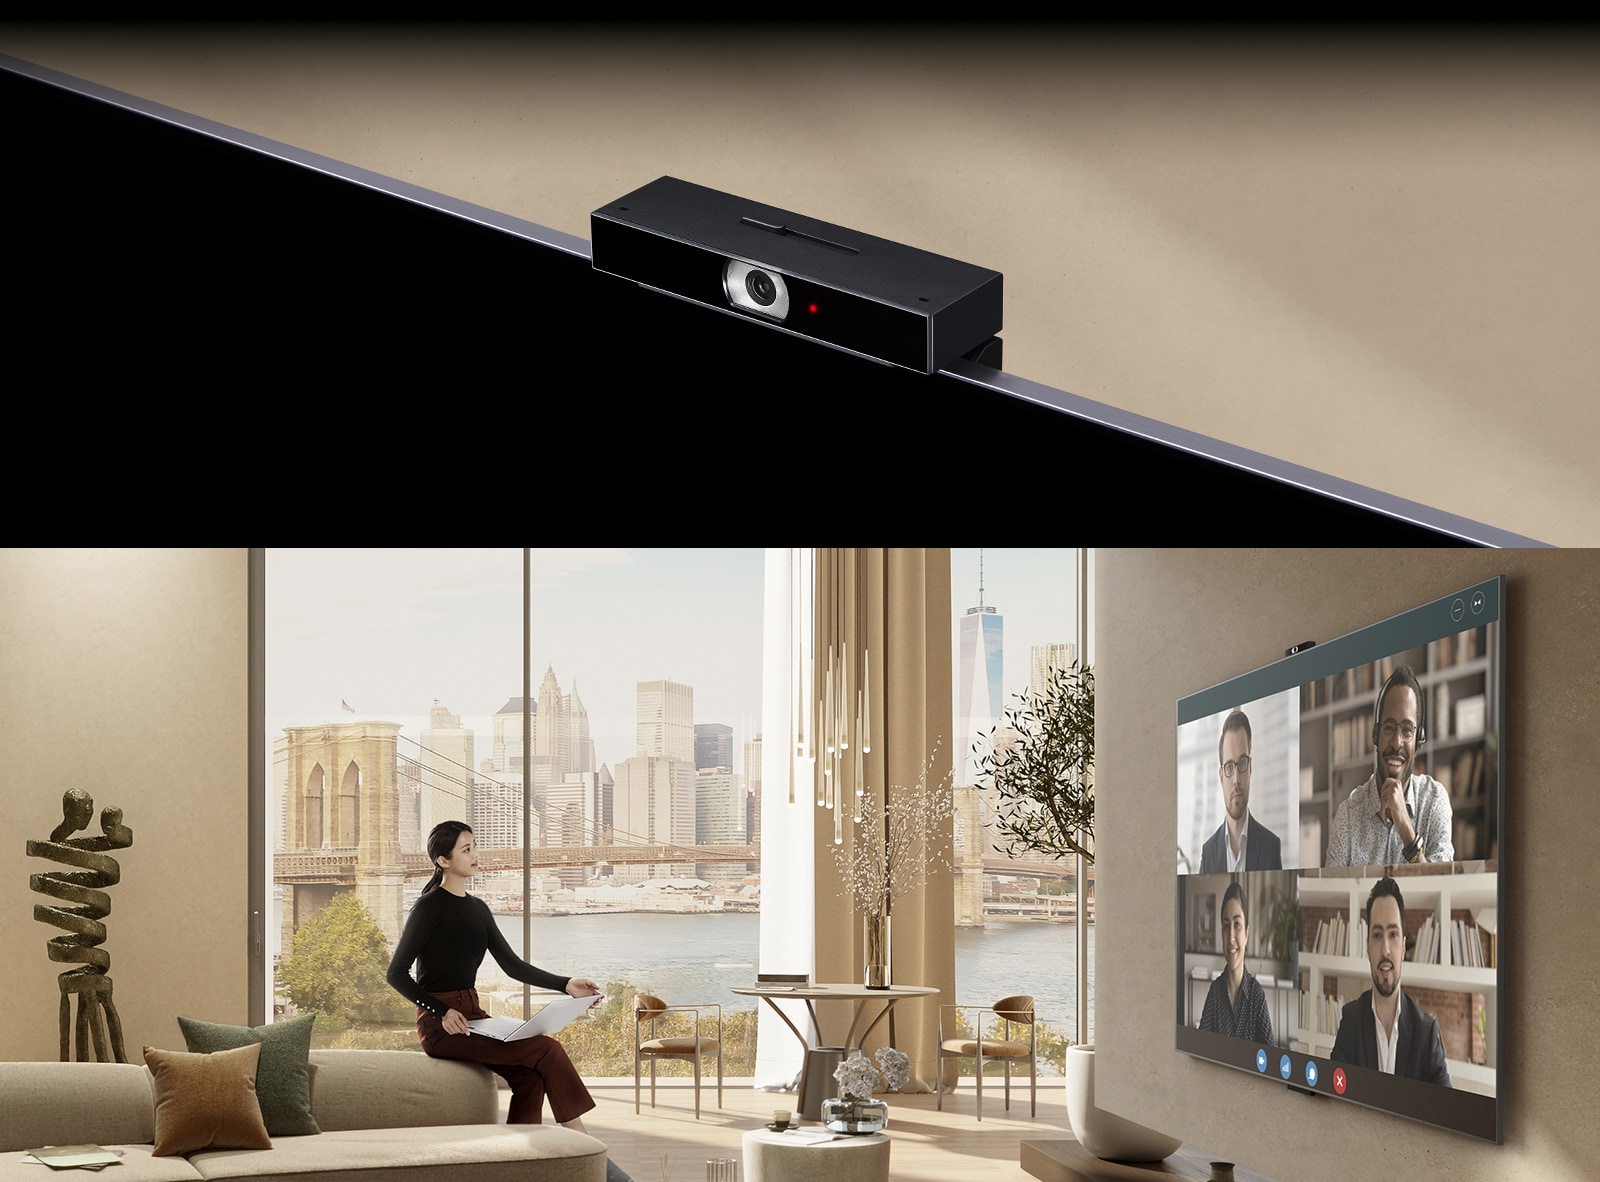 The first image depicts a close-up view of an LG Smart Cam installed on a TV in a beige-colored space. In the second image, a woman is seen sitting on the armrest of a sofa while holding a laptop and watching TV. On the large screen of the TV, there are four characters and a video conference visible.